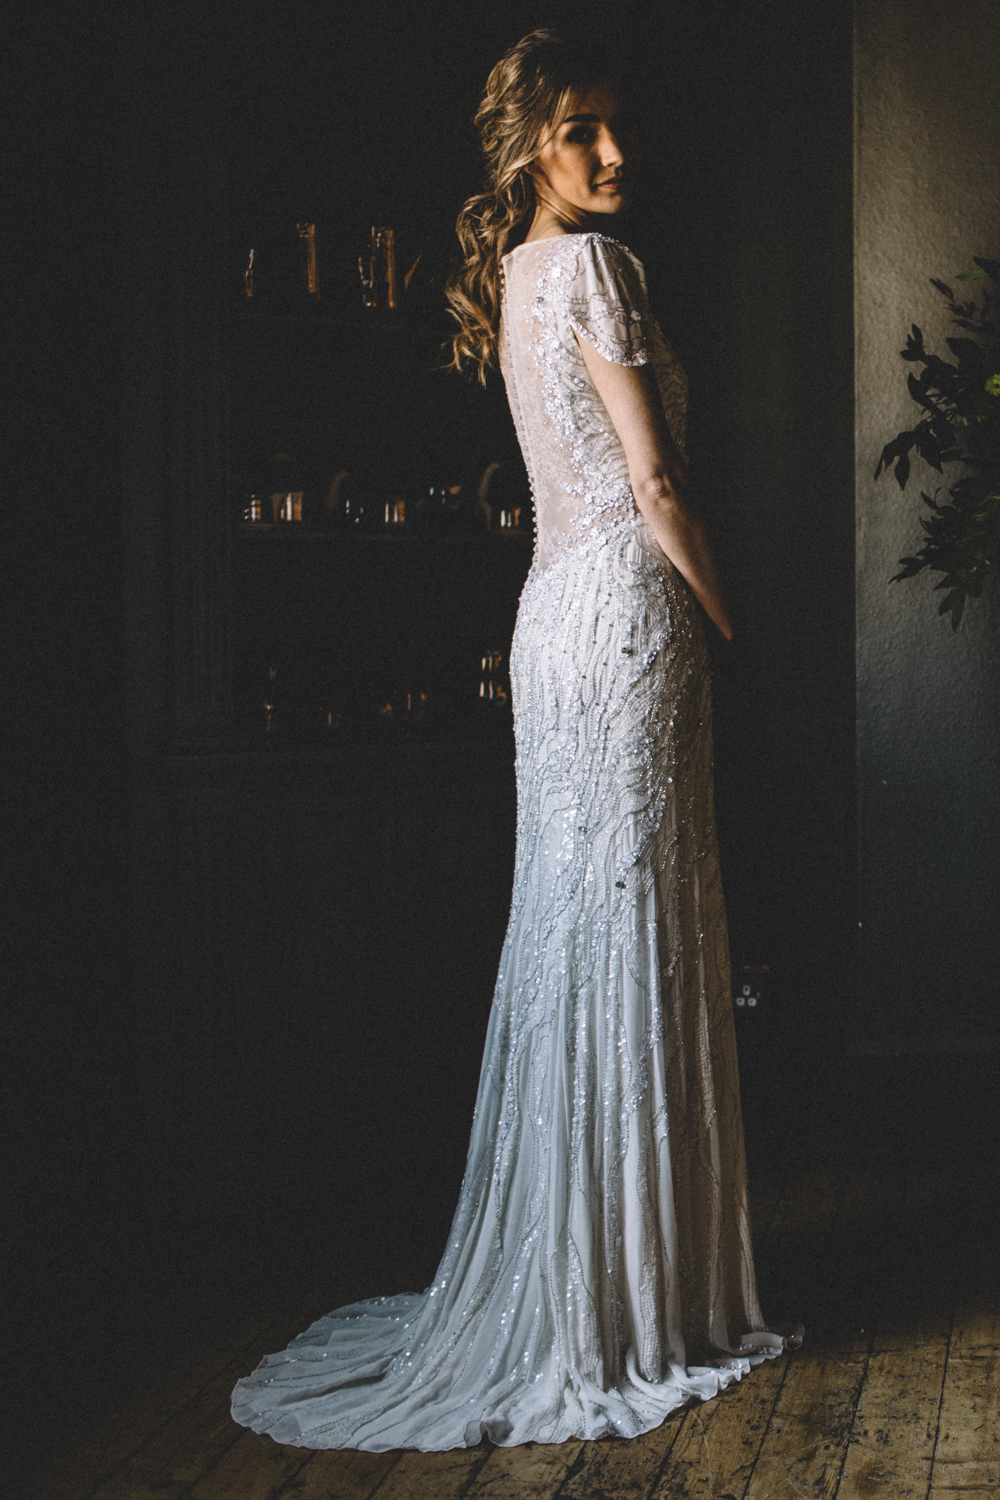 The bride was wearing a Jenny Packham wedding dress with an illusion neckline and back and cap sleeves with a sparkle